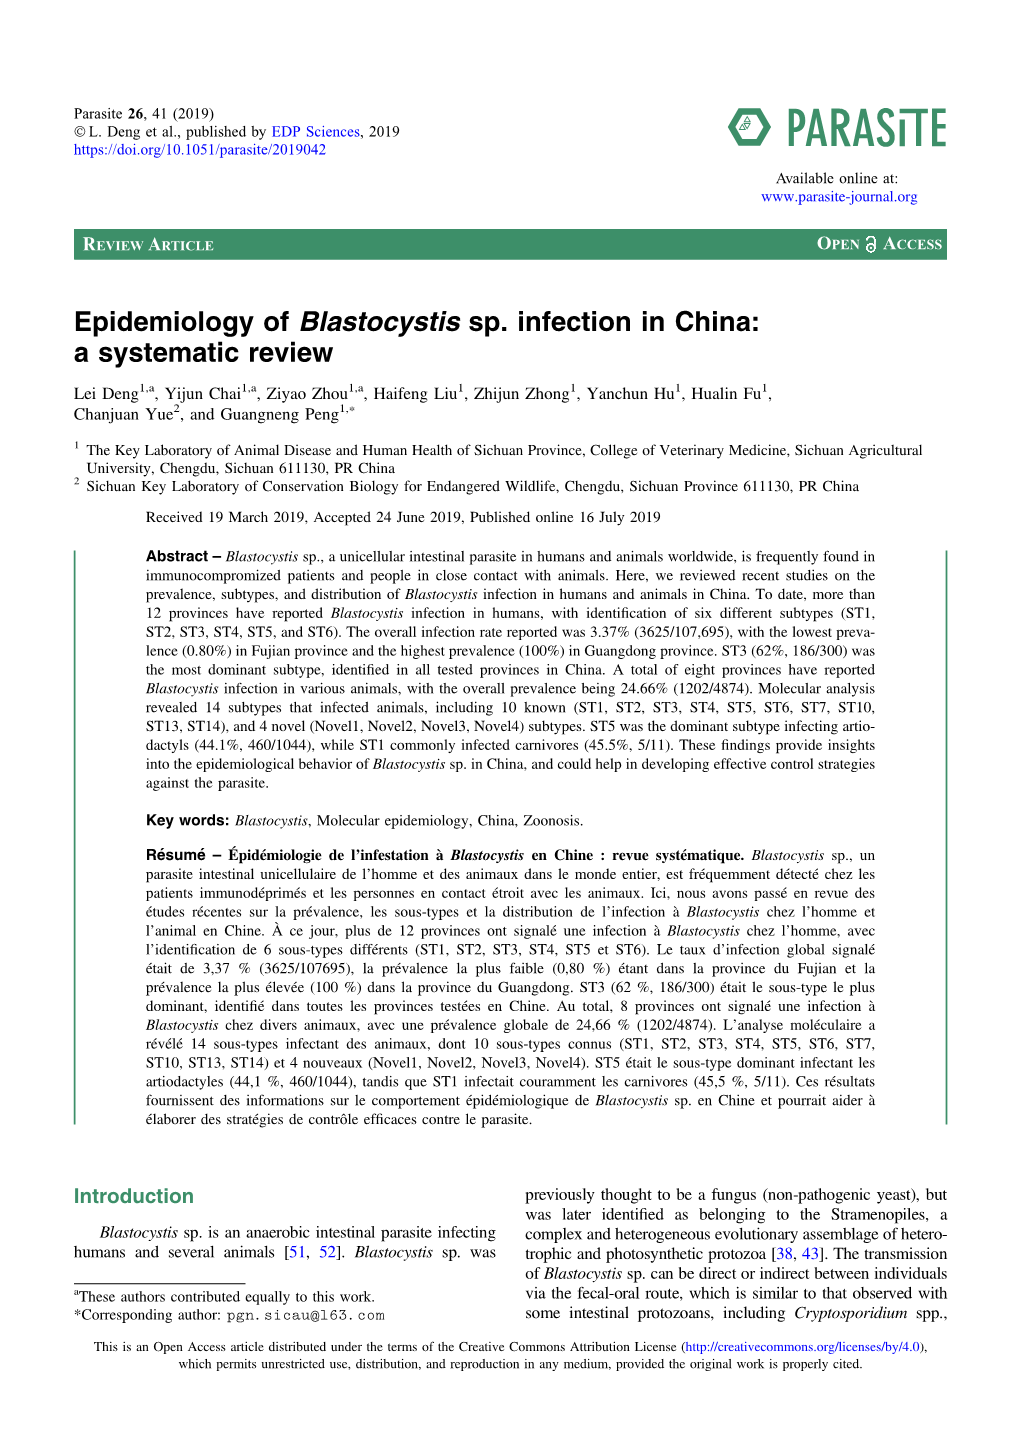 Epidemiology of Blastocystis Sp. Infection in China: a Systematic Review